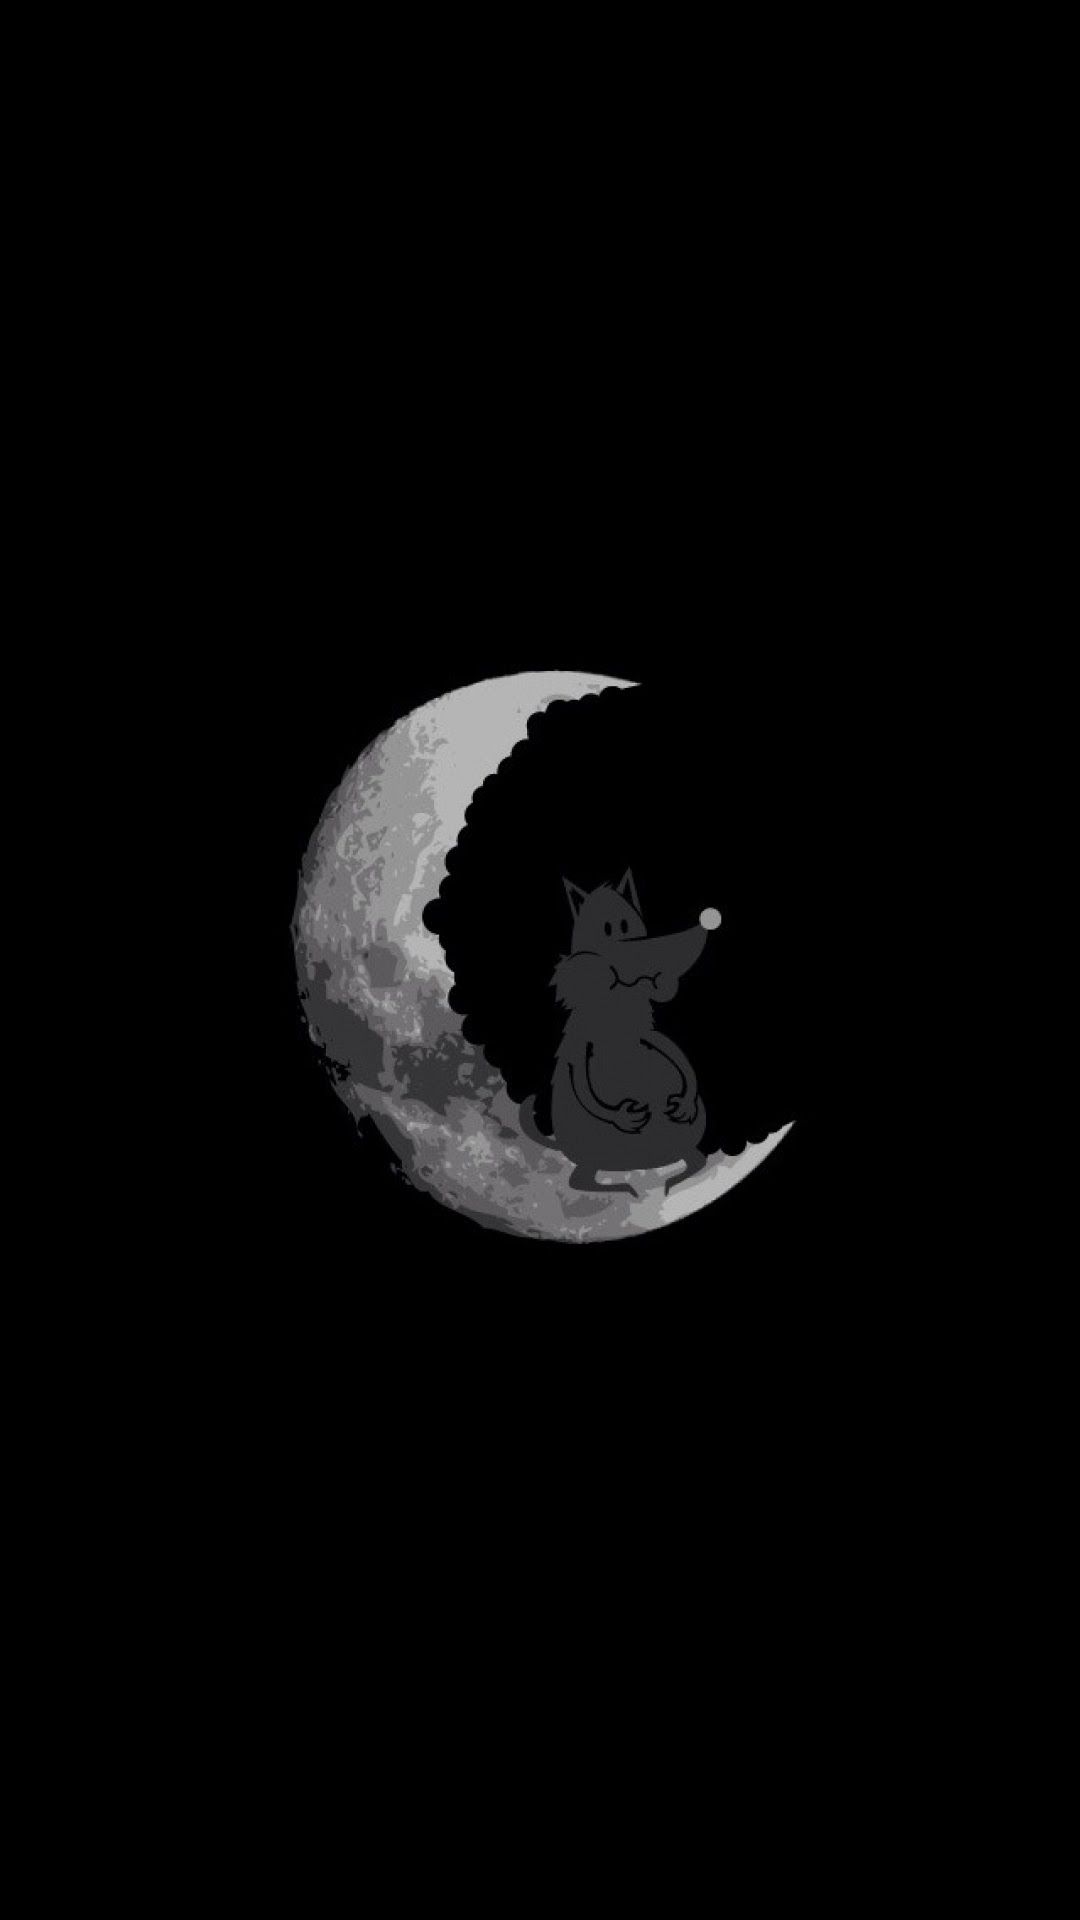 Android Best Wallpaper: Cartoon Moon and Fox Android Best Wallpaper